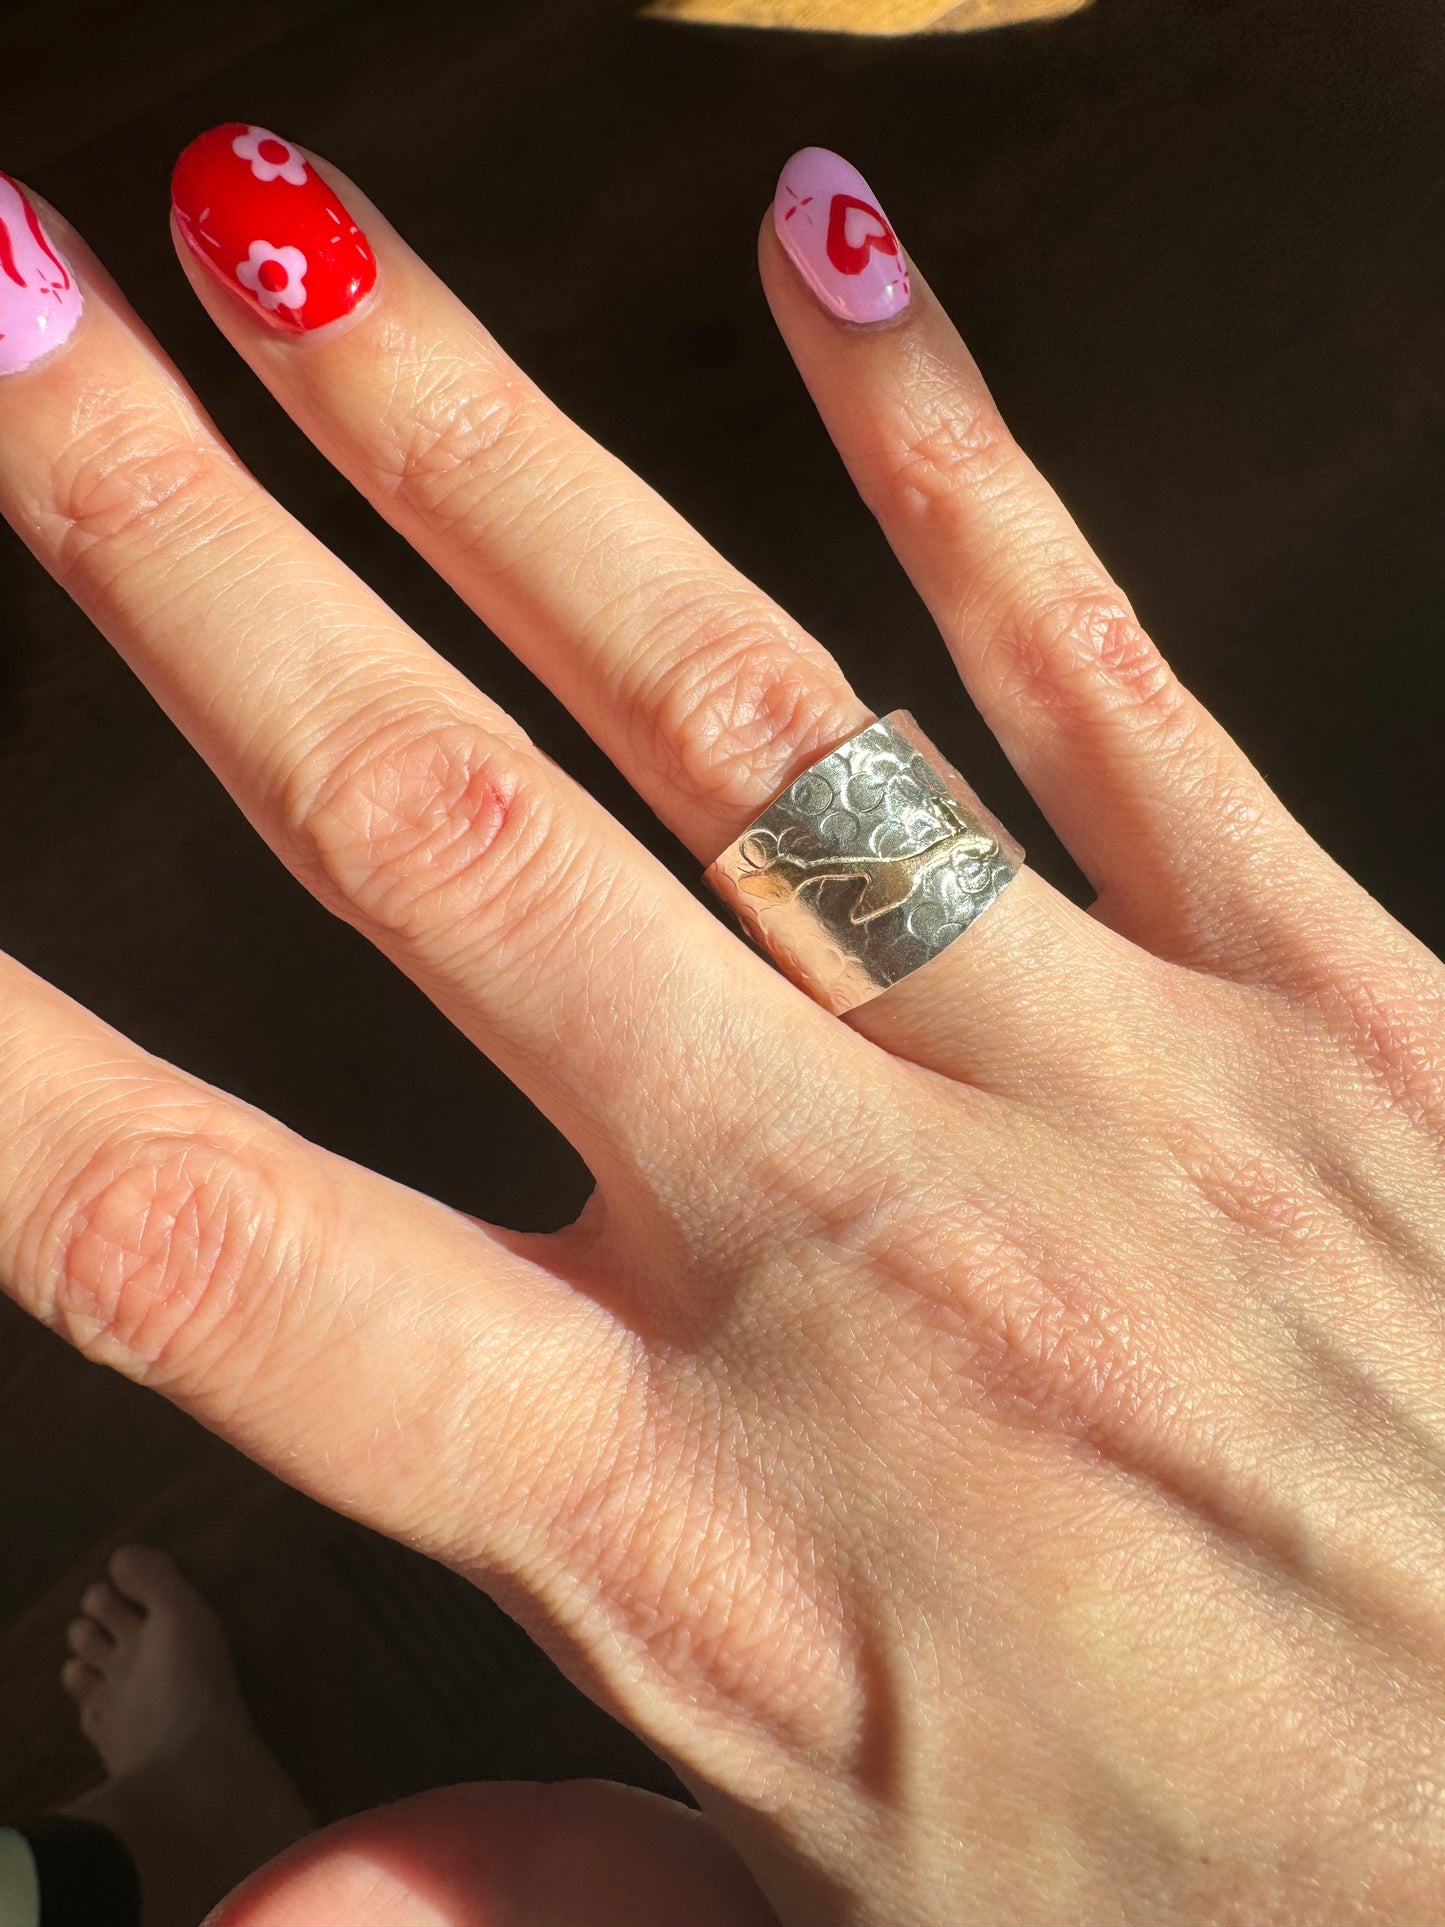 Hammered Silver Band with Vines (6.5/6.75)